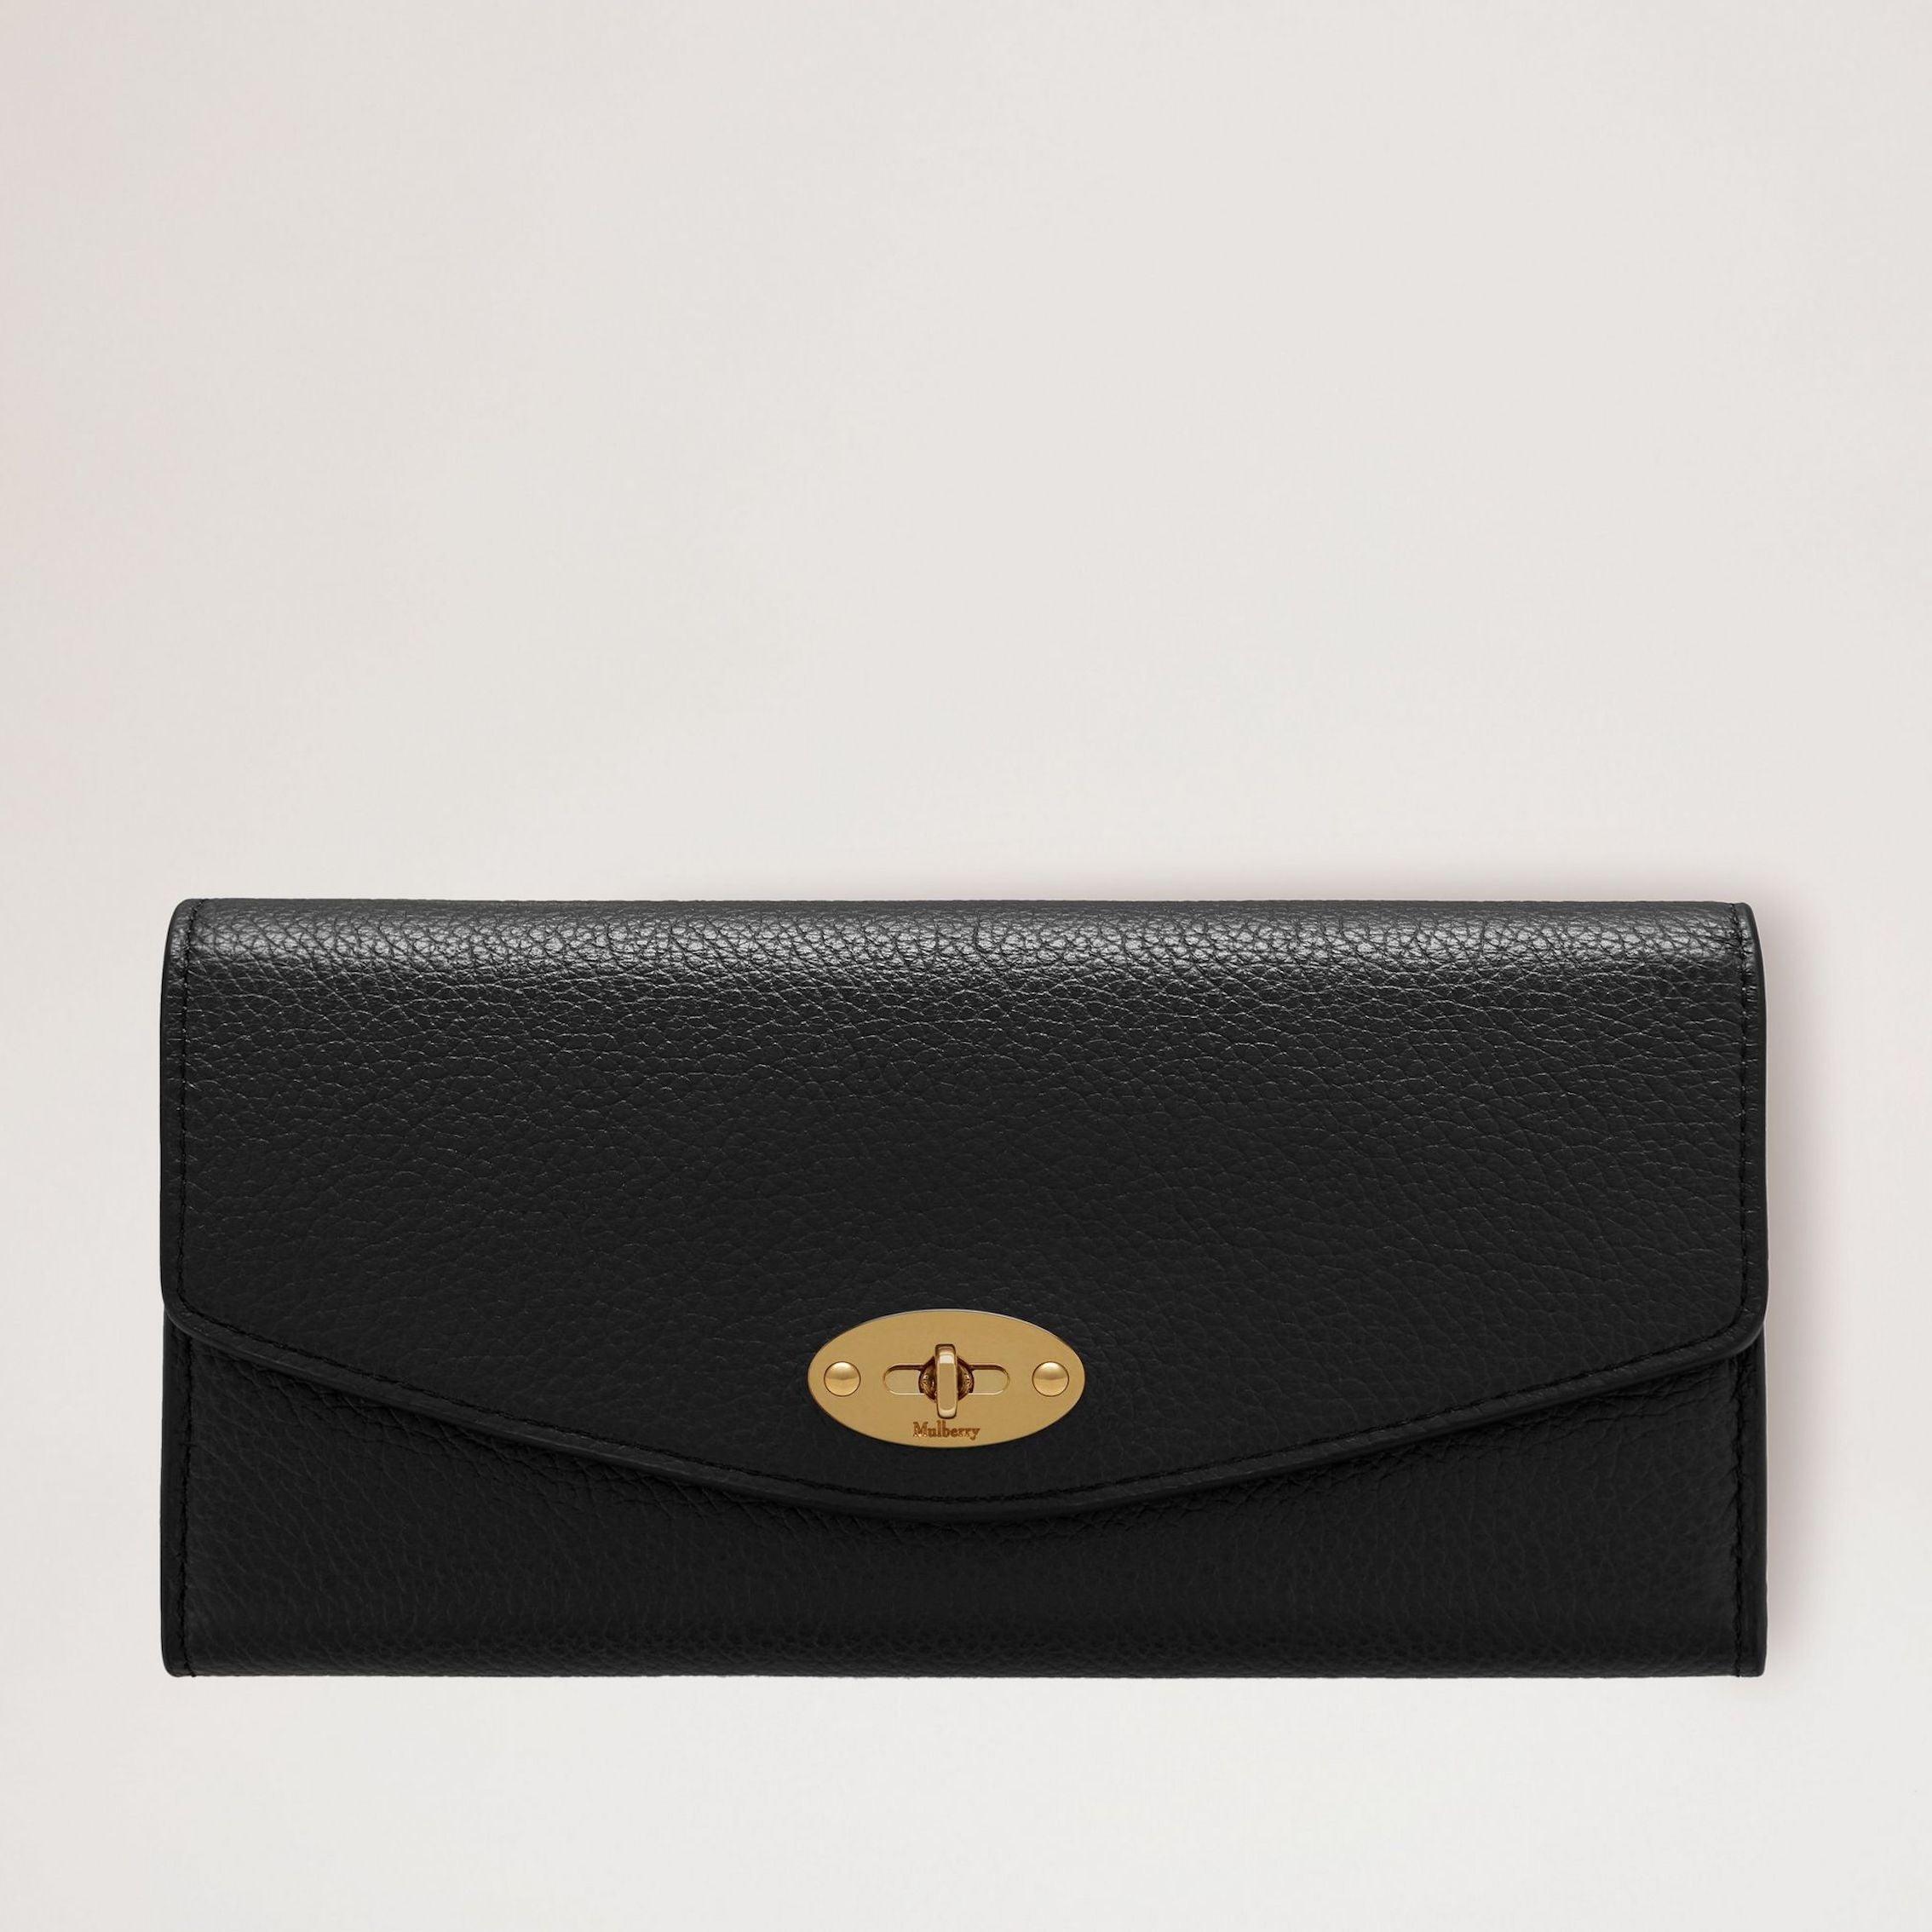 Mulberry Pung Wallet Small Classic Grain Black